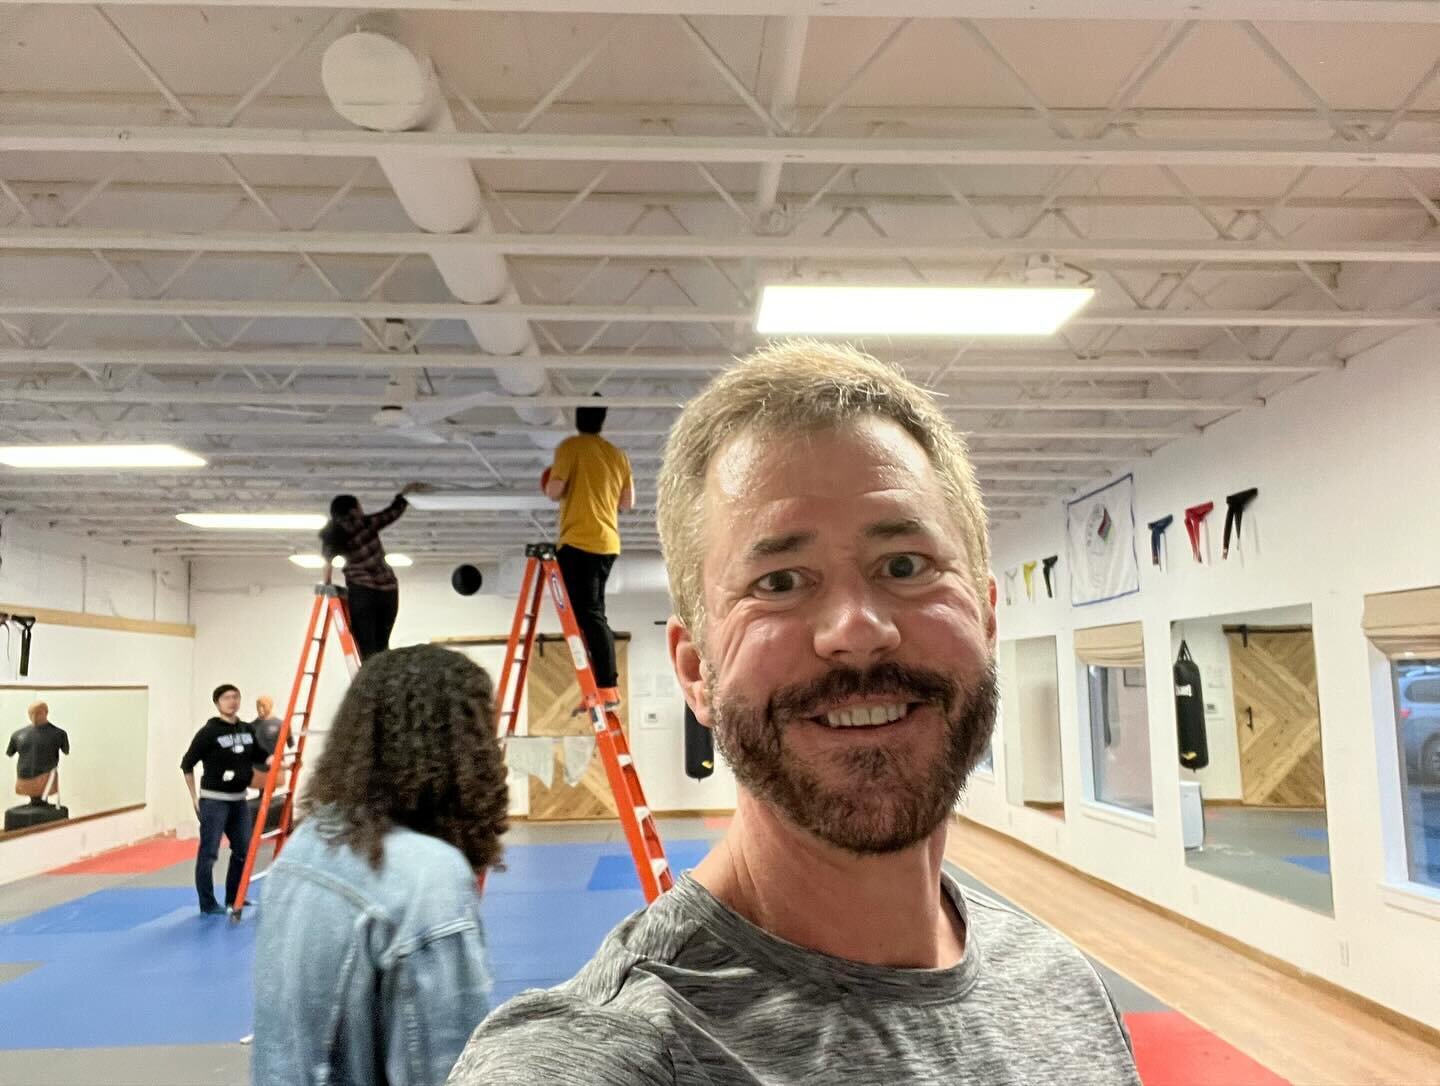 Thank you to our amazing volunteer community always showing up and bringing your light to our dojo!  #springcleaning #teamwork Also, special thanks to @kurt_hulse2 for organizing the event